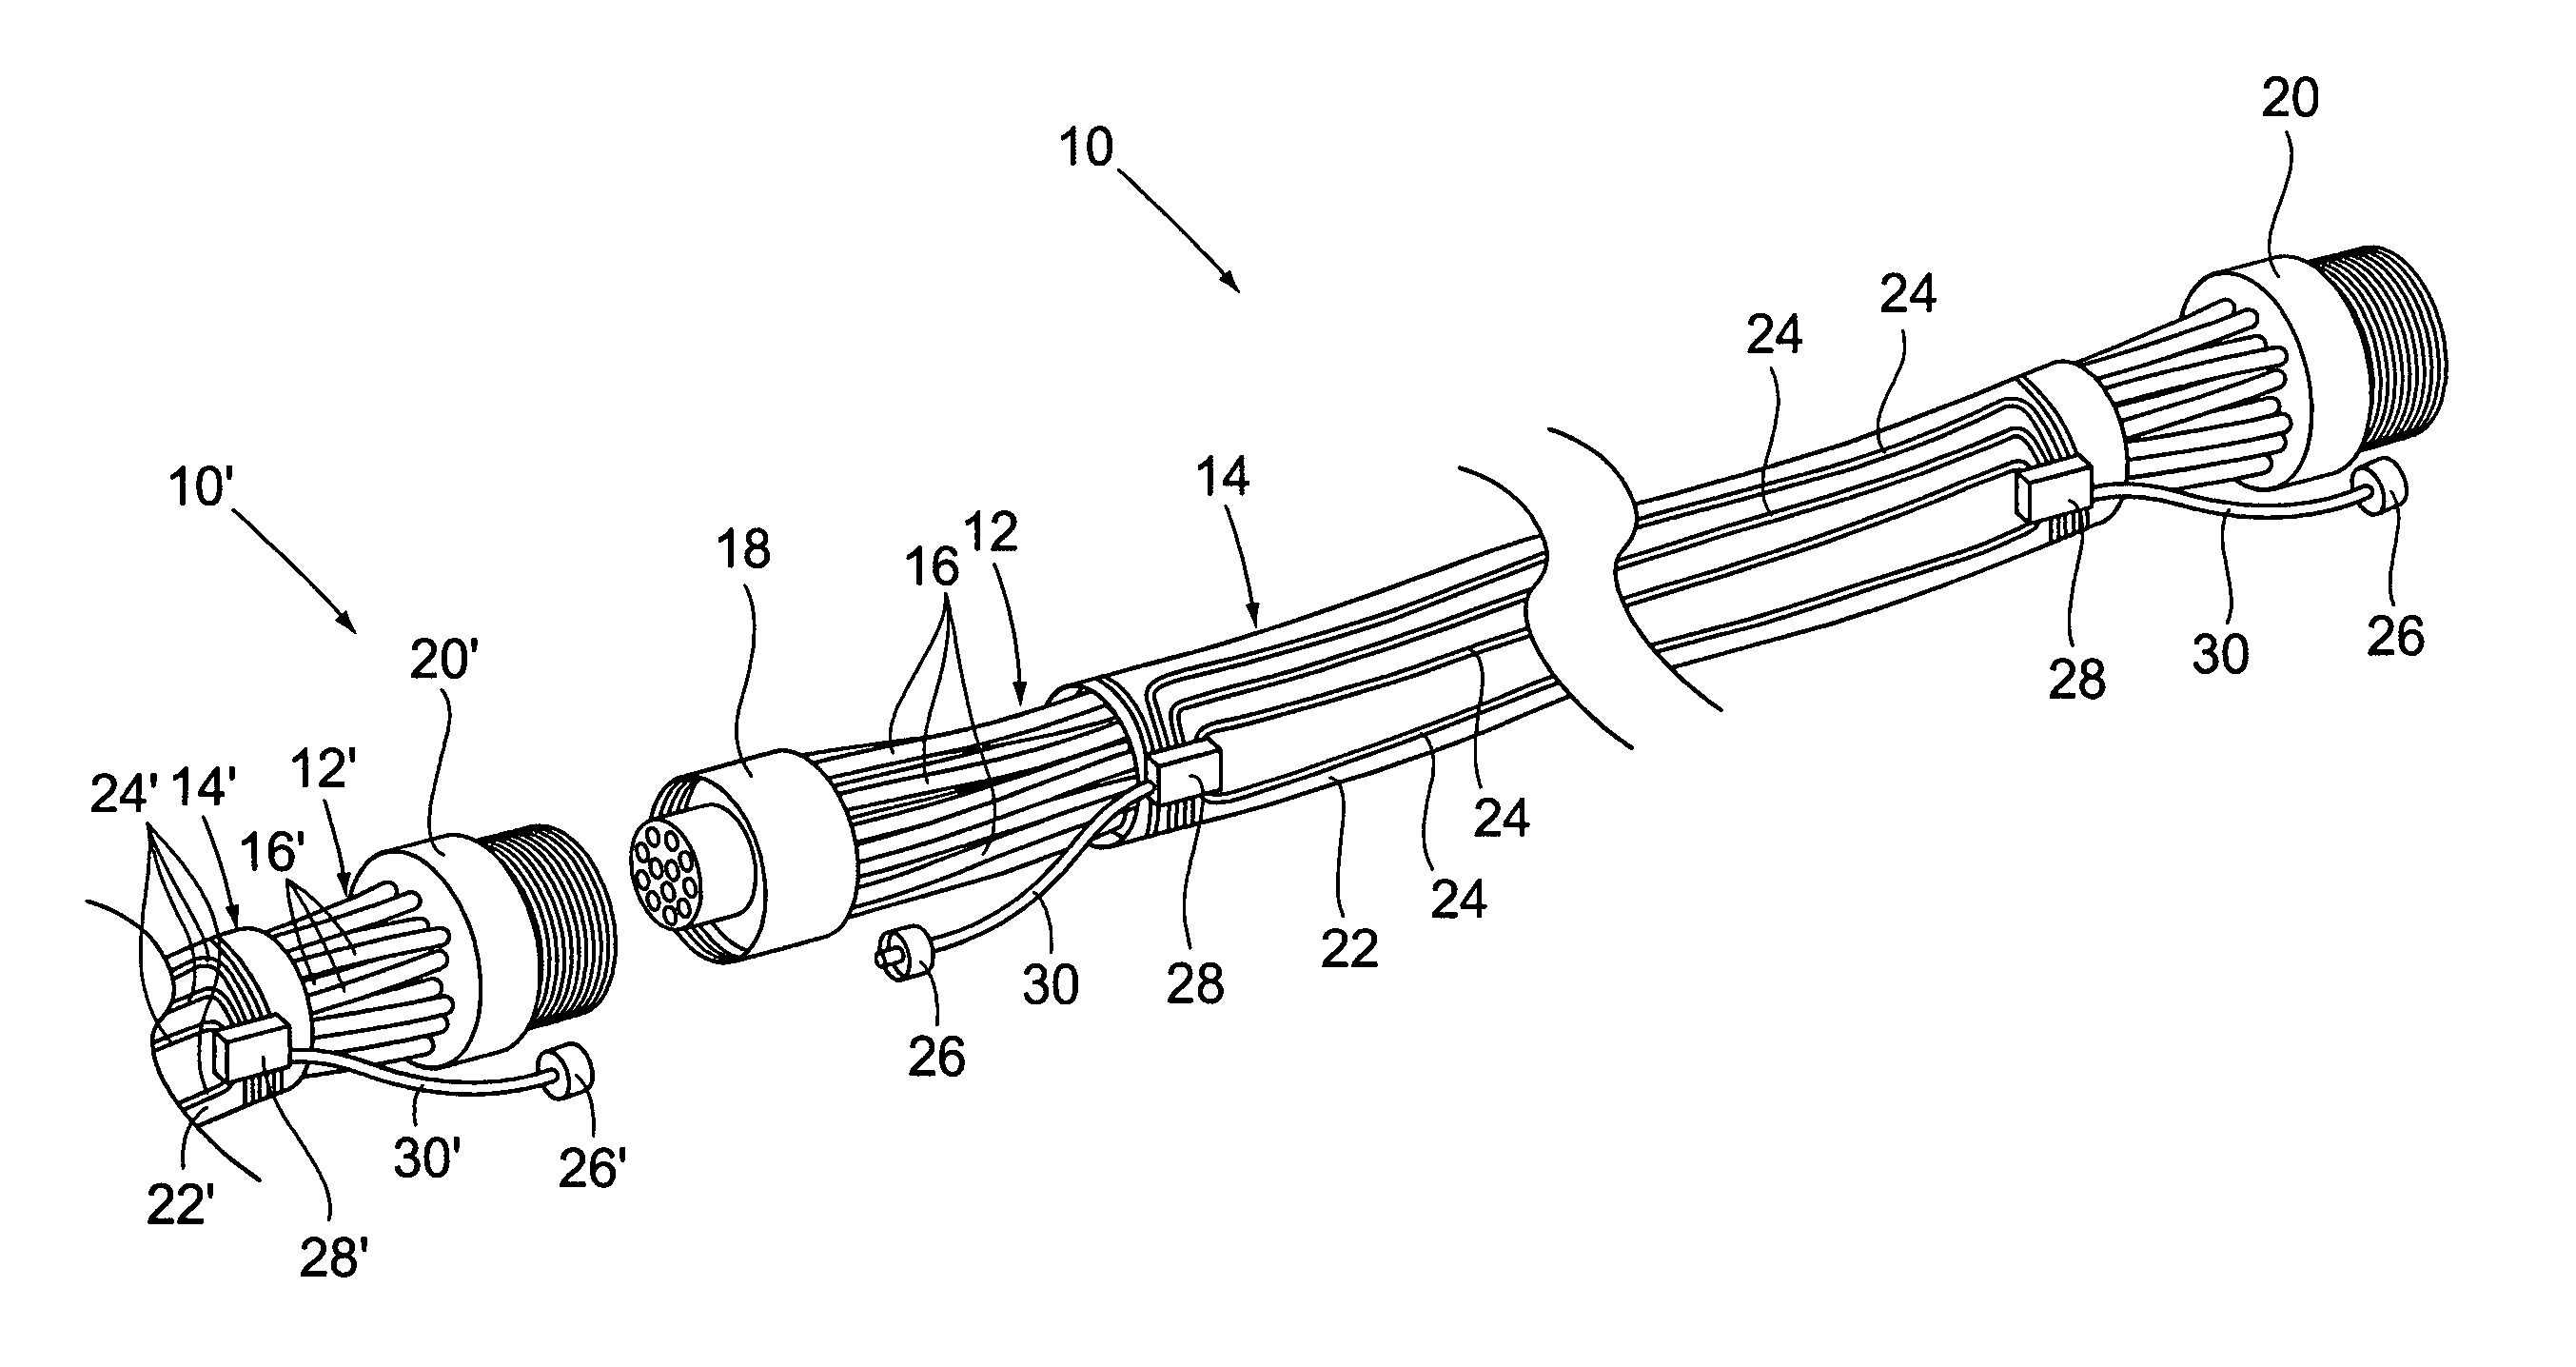 Apparatus and method for monitoring electrical cable chafing via optical waveguides